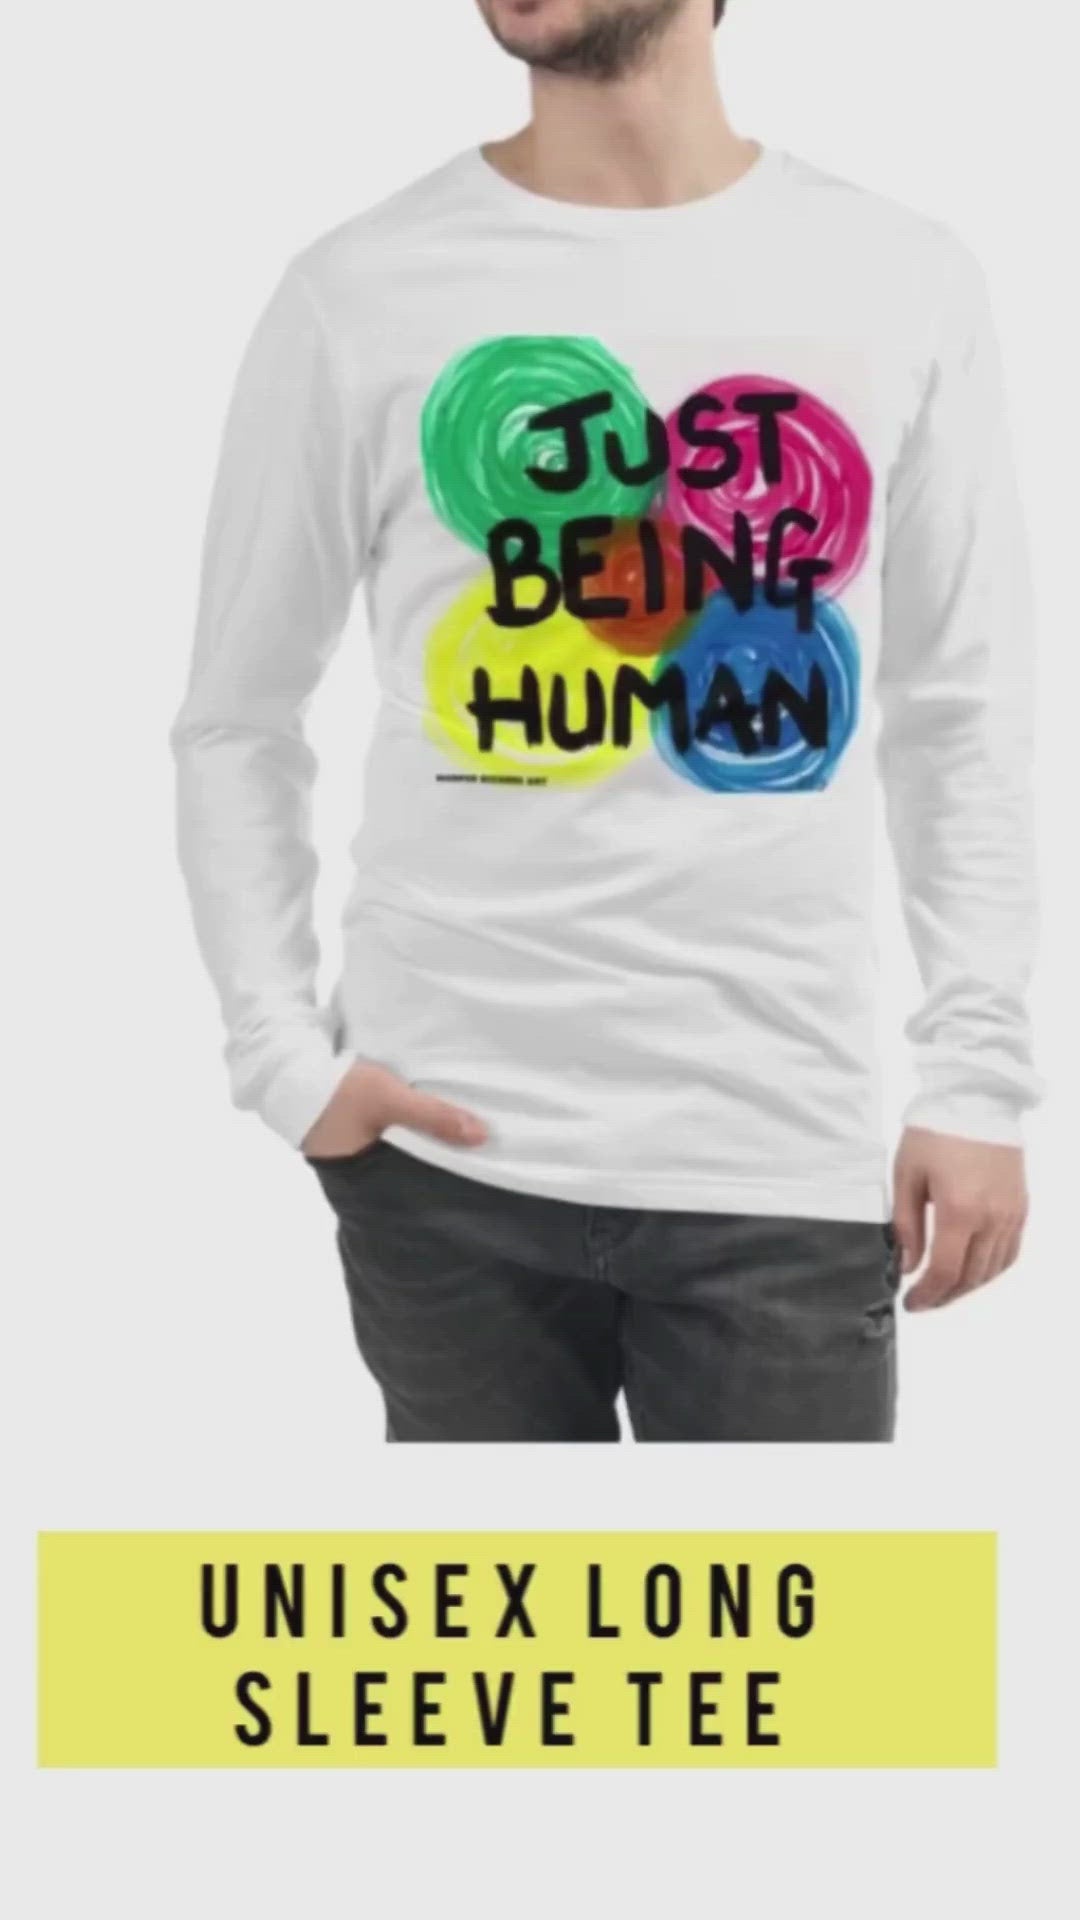 White unisex long sleeves tee shirt with exclusive artwork "Just being human" print 